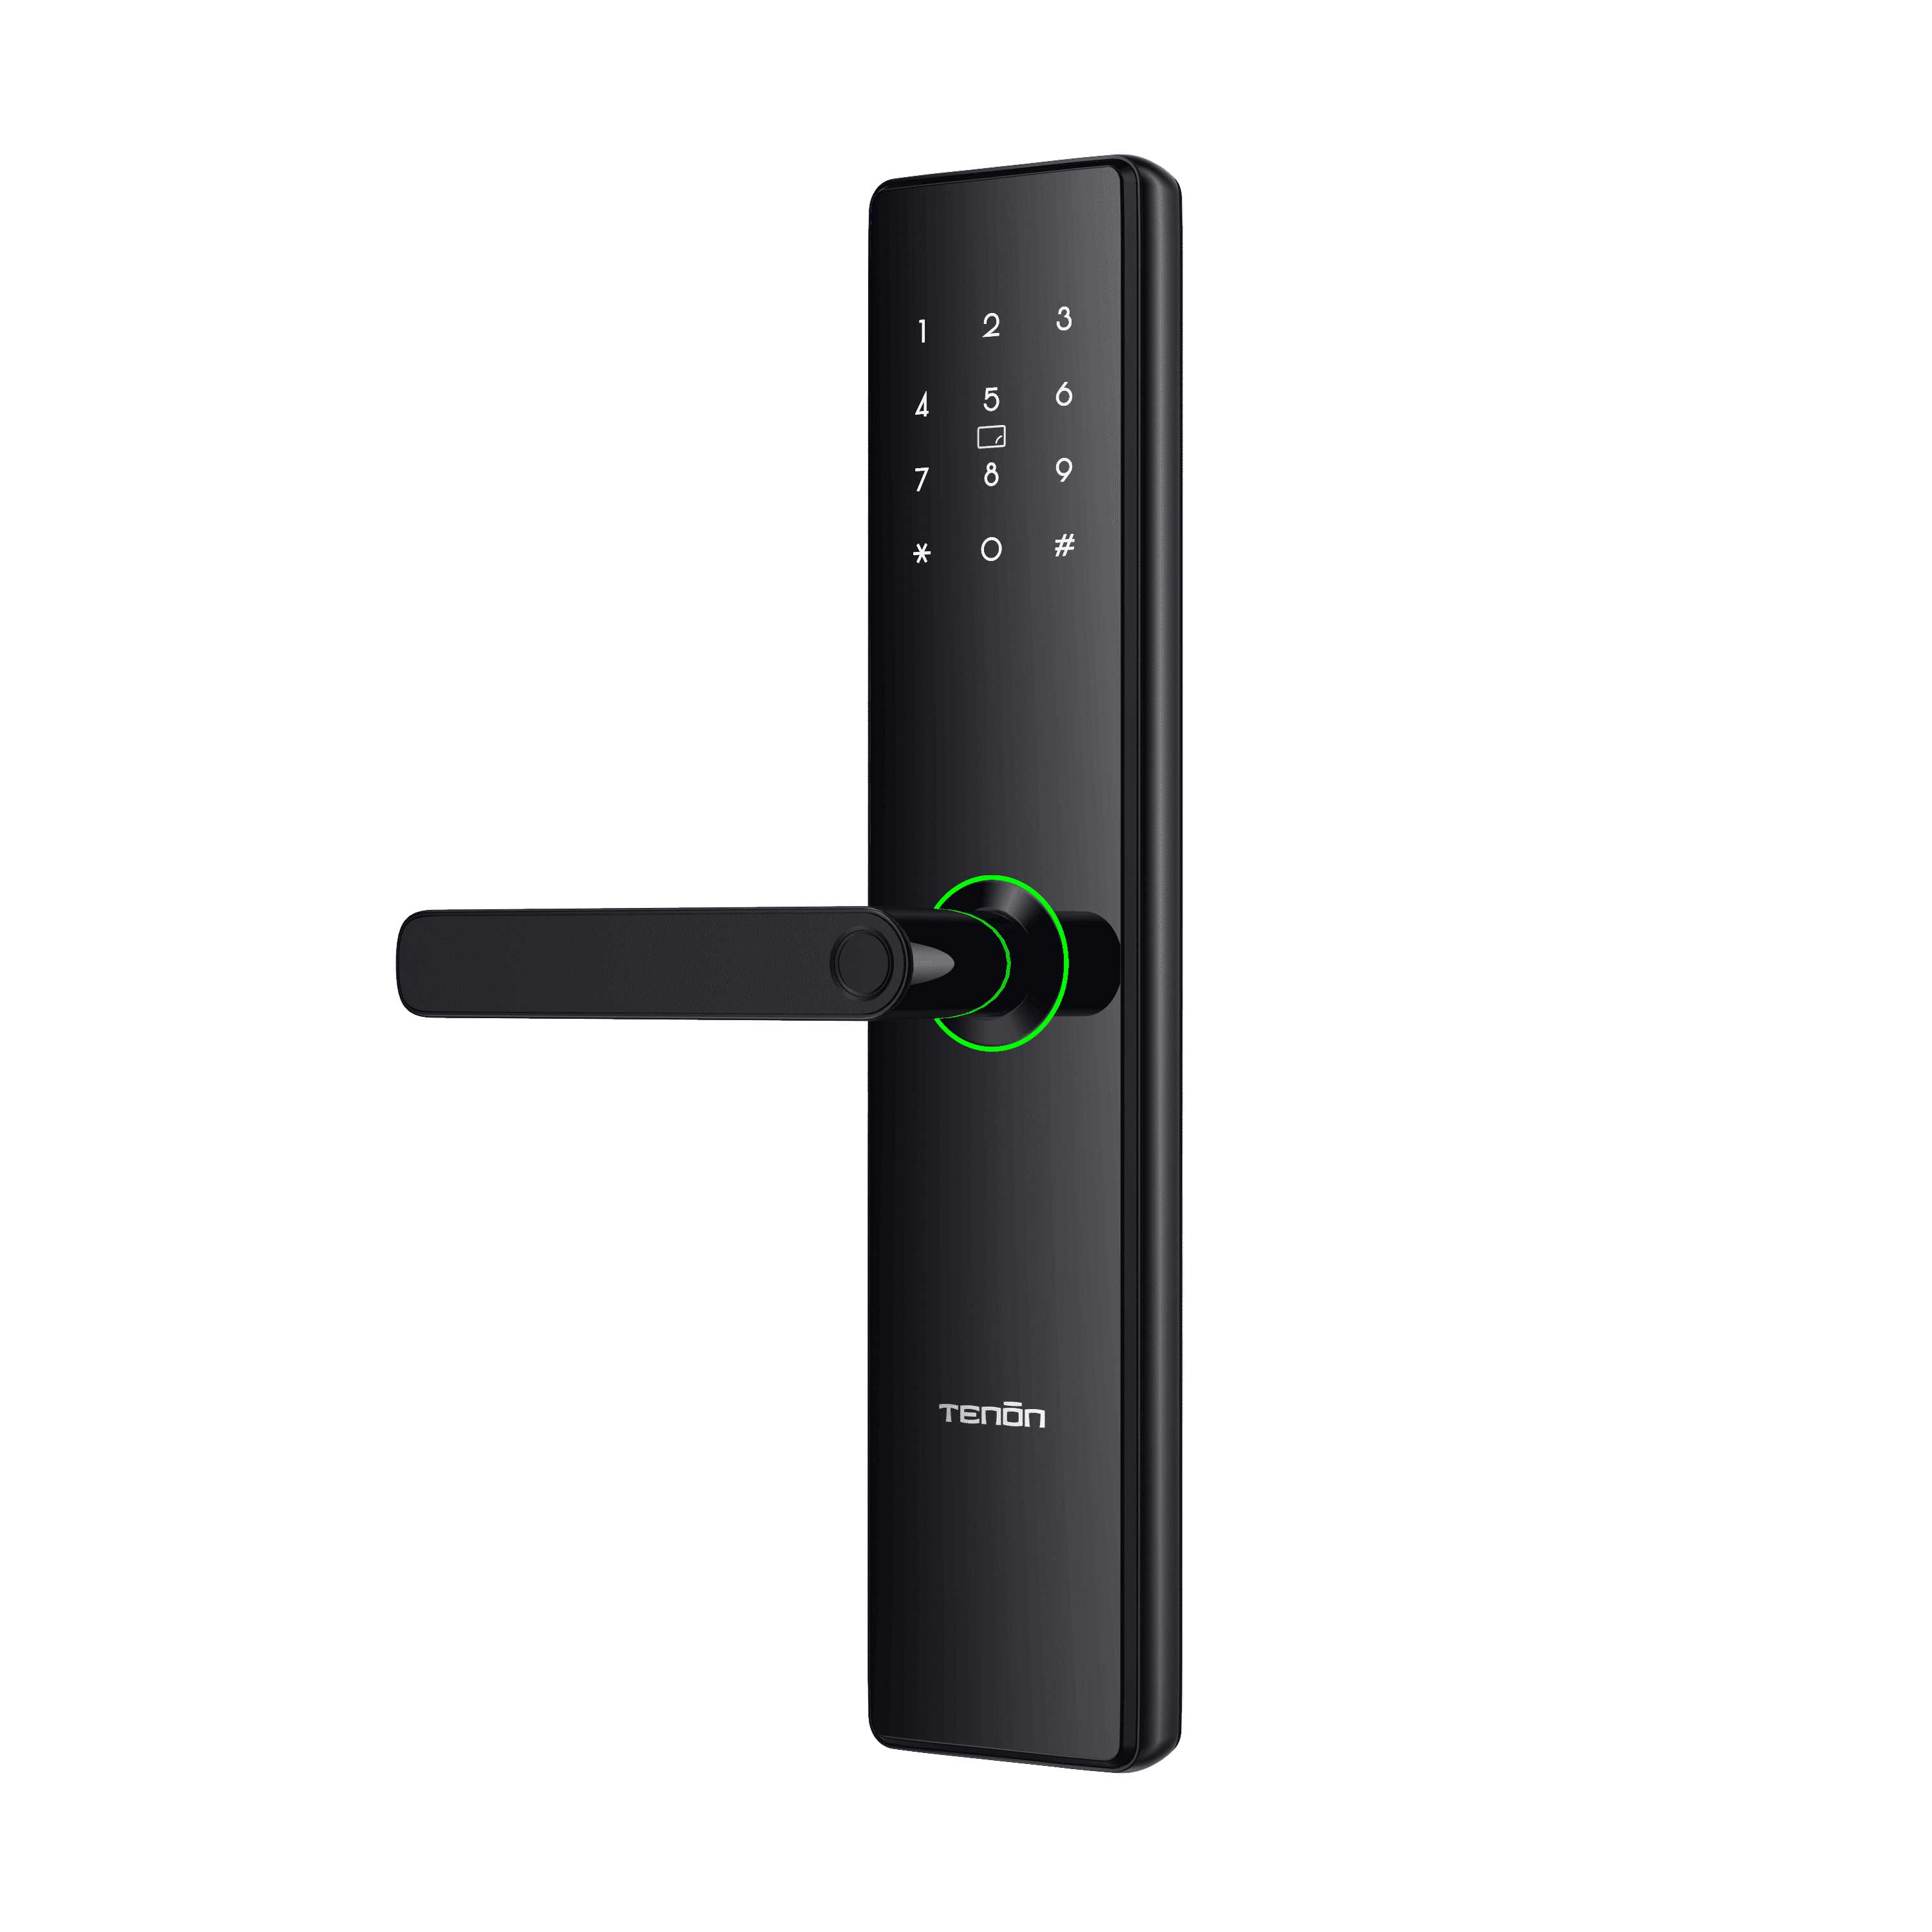 E15 REMOTE ACCESS SMART TOUCHPAD BLUETOOTH-ENABLED SMART LOCK